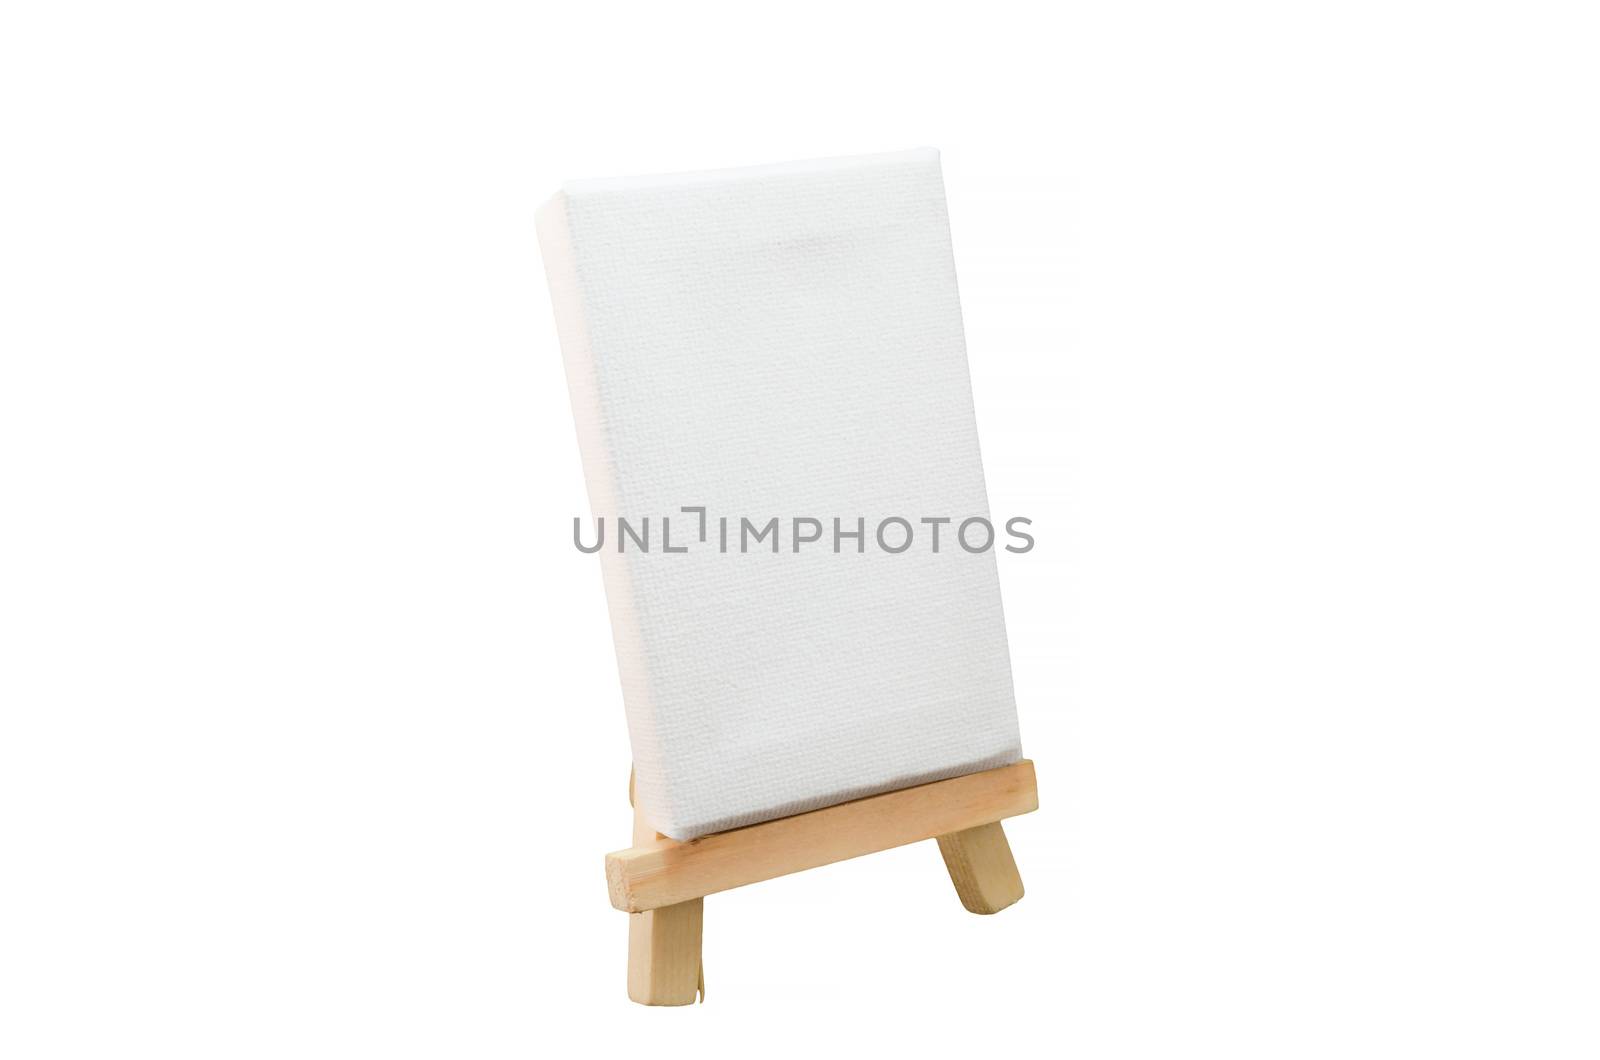 Miniature artist easel, isolated on white with path.